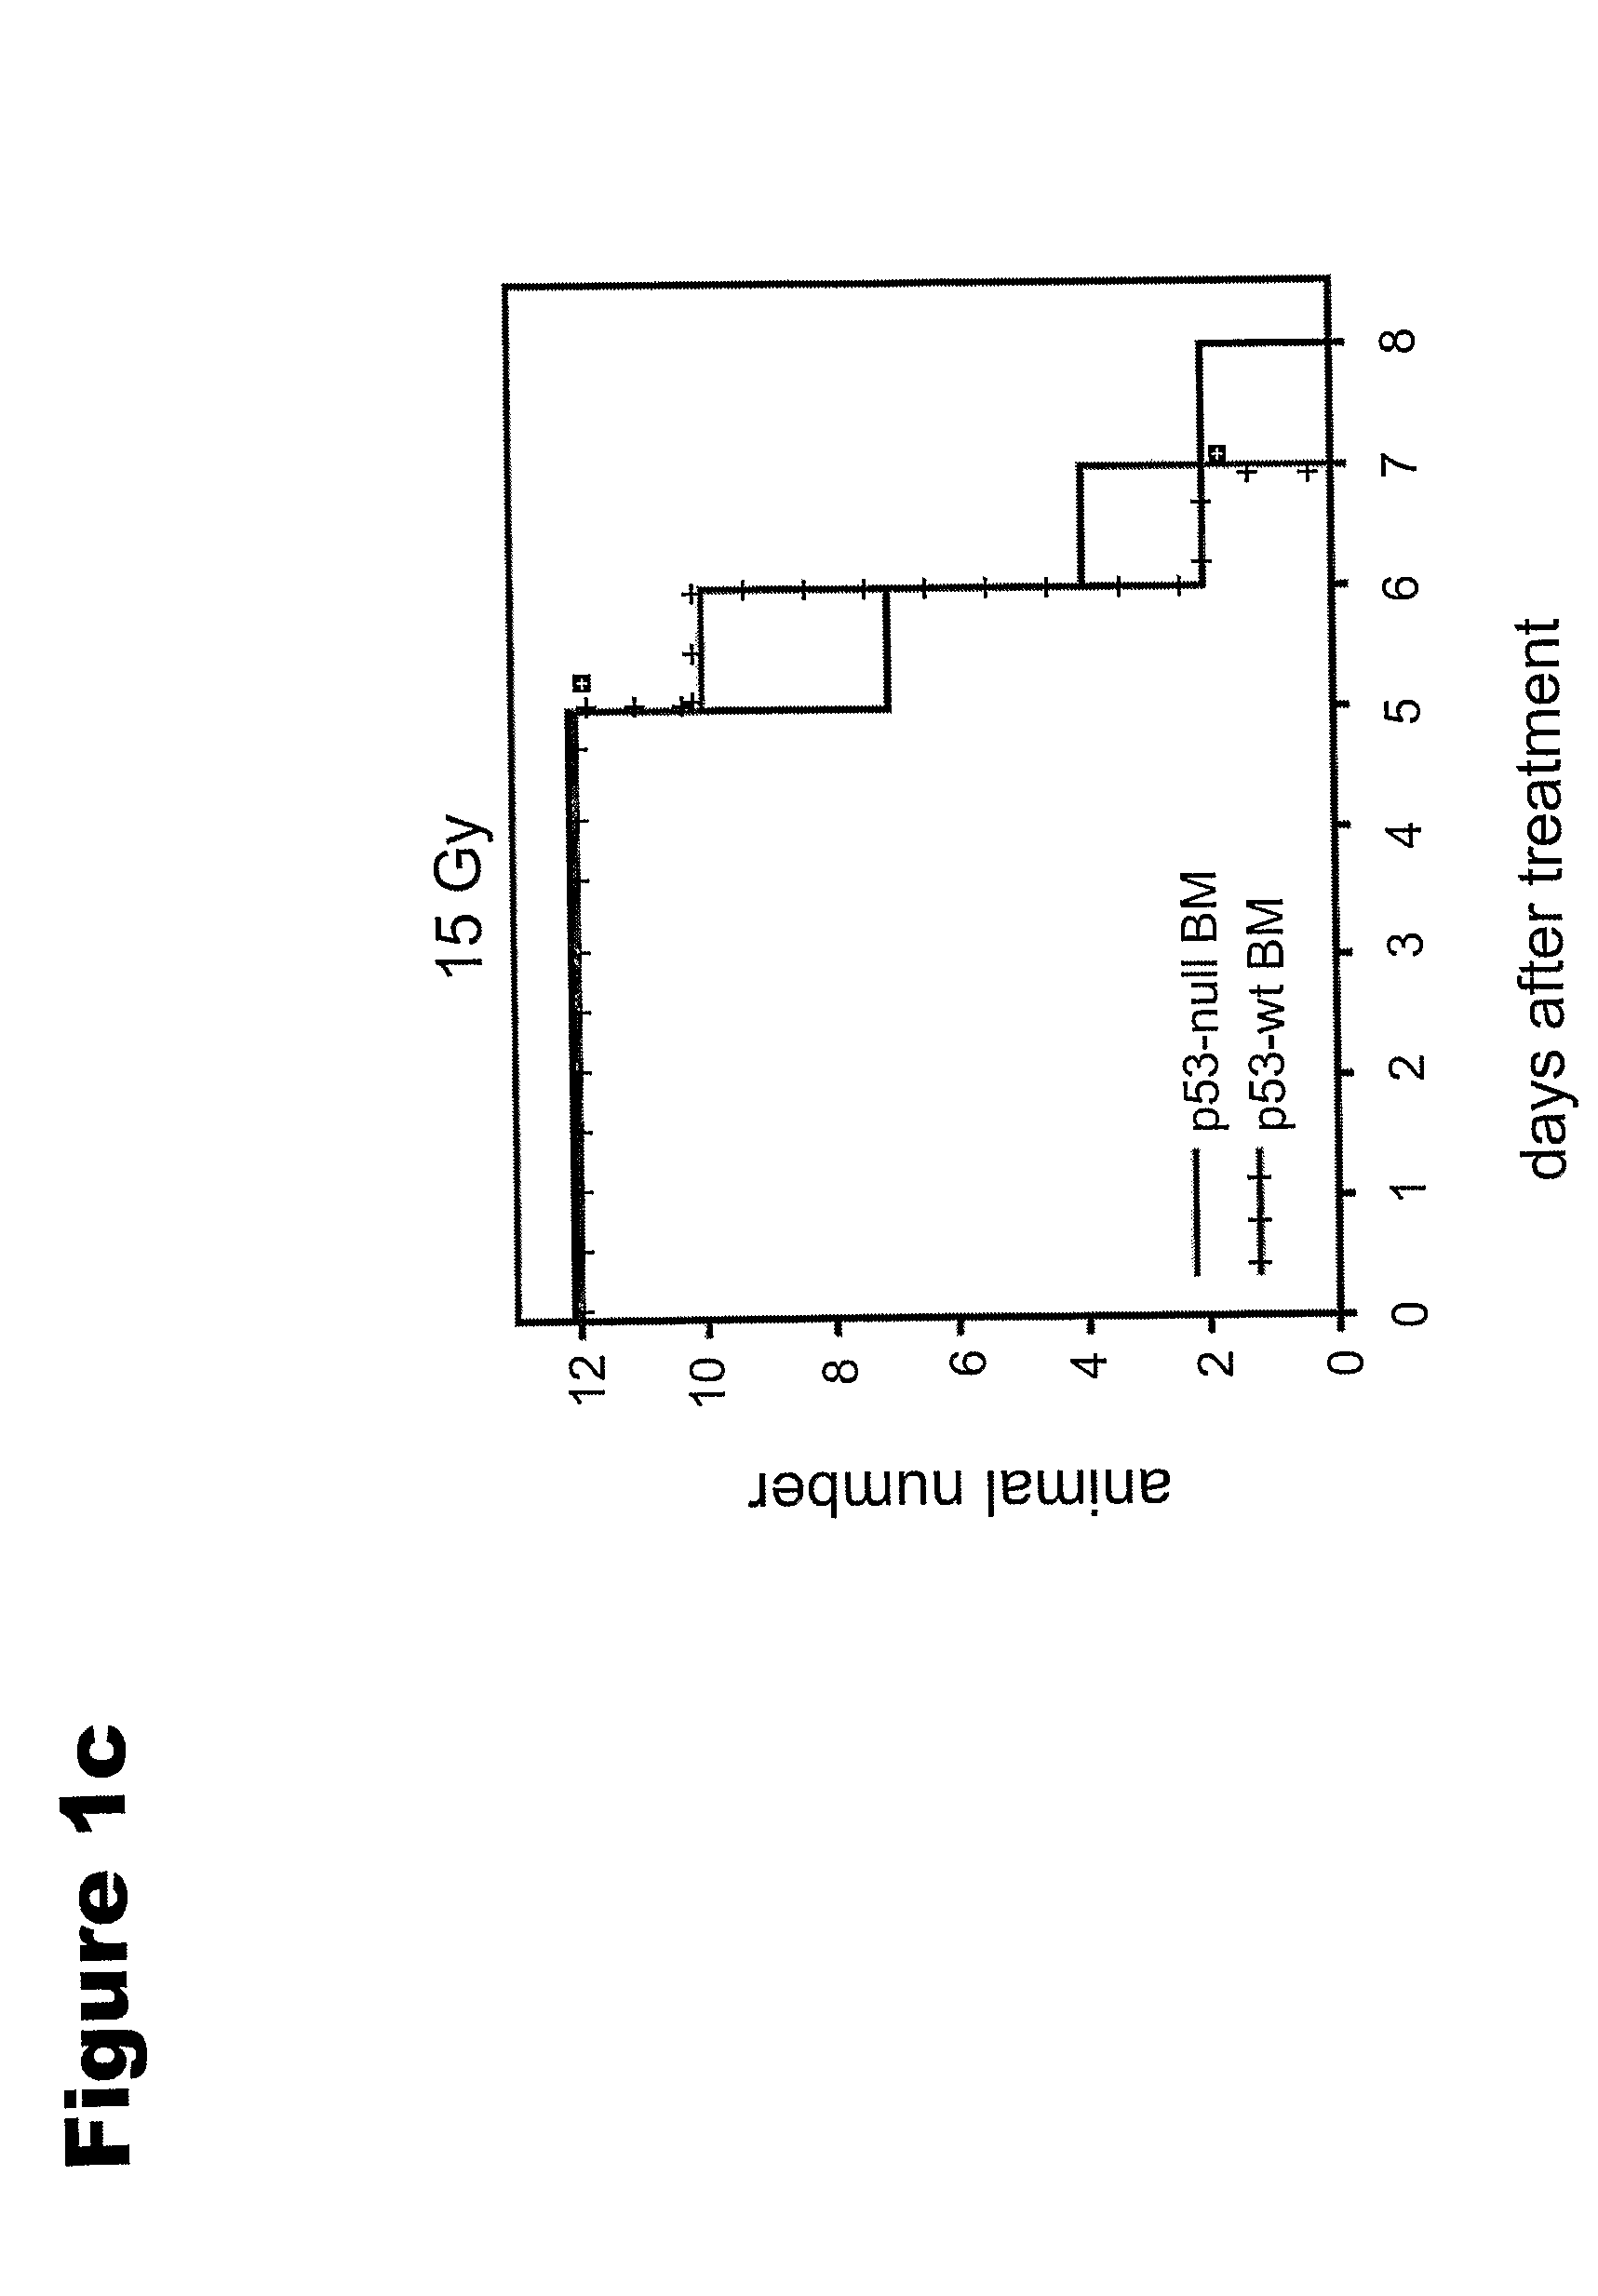 Methods of protecting against apoptosis using lipopeptides